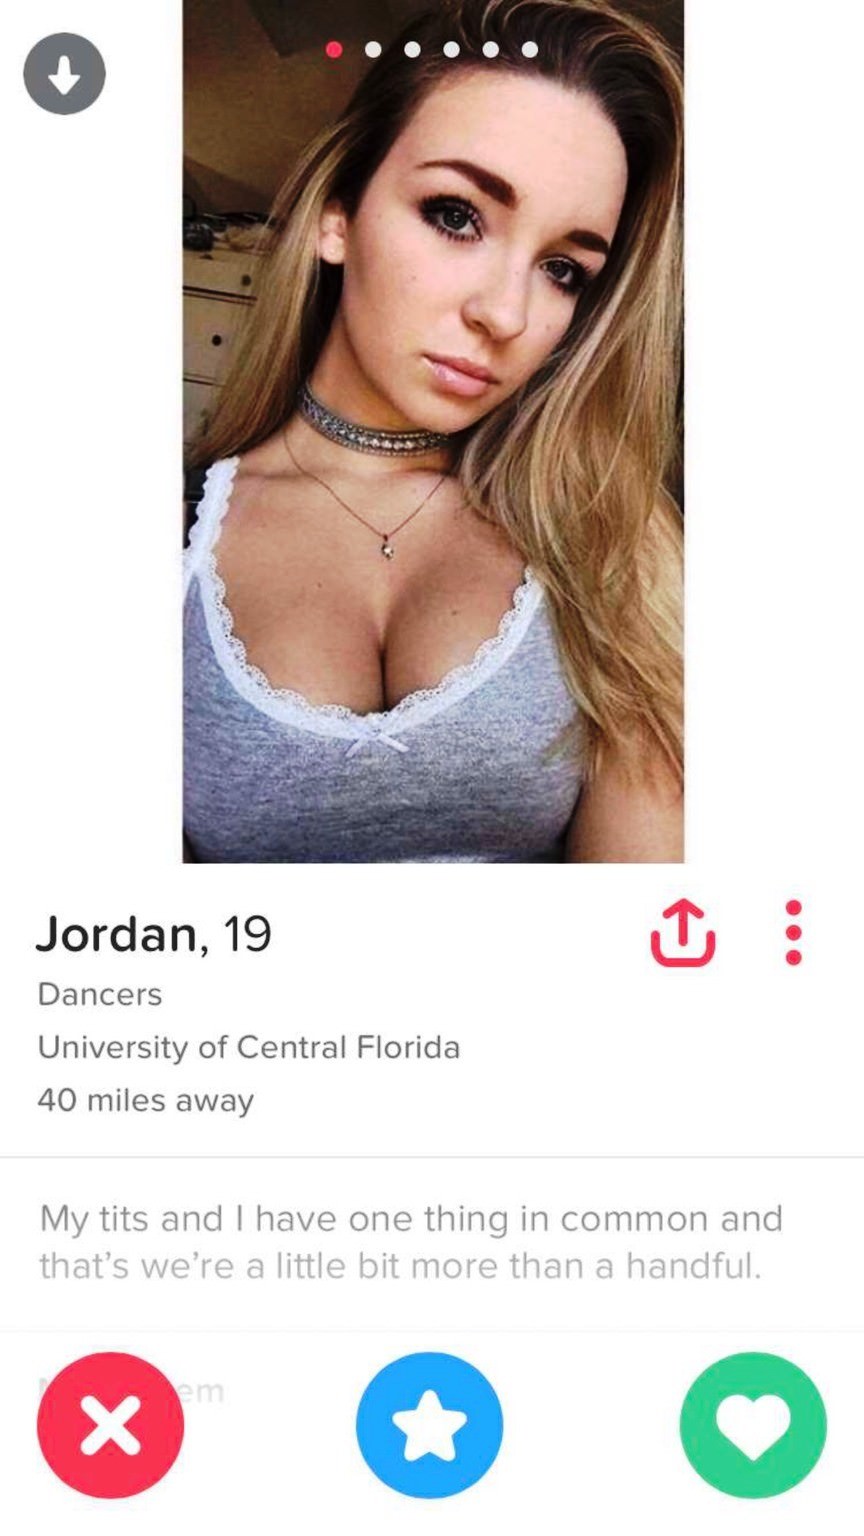 girls of tinder - Jordan, 19 Dancers University of Central Florida 40 miles away My tits and I have one thing in common and that's we're a little bit more than a handful.